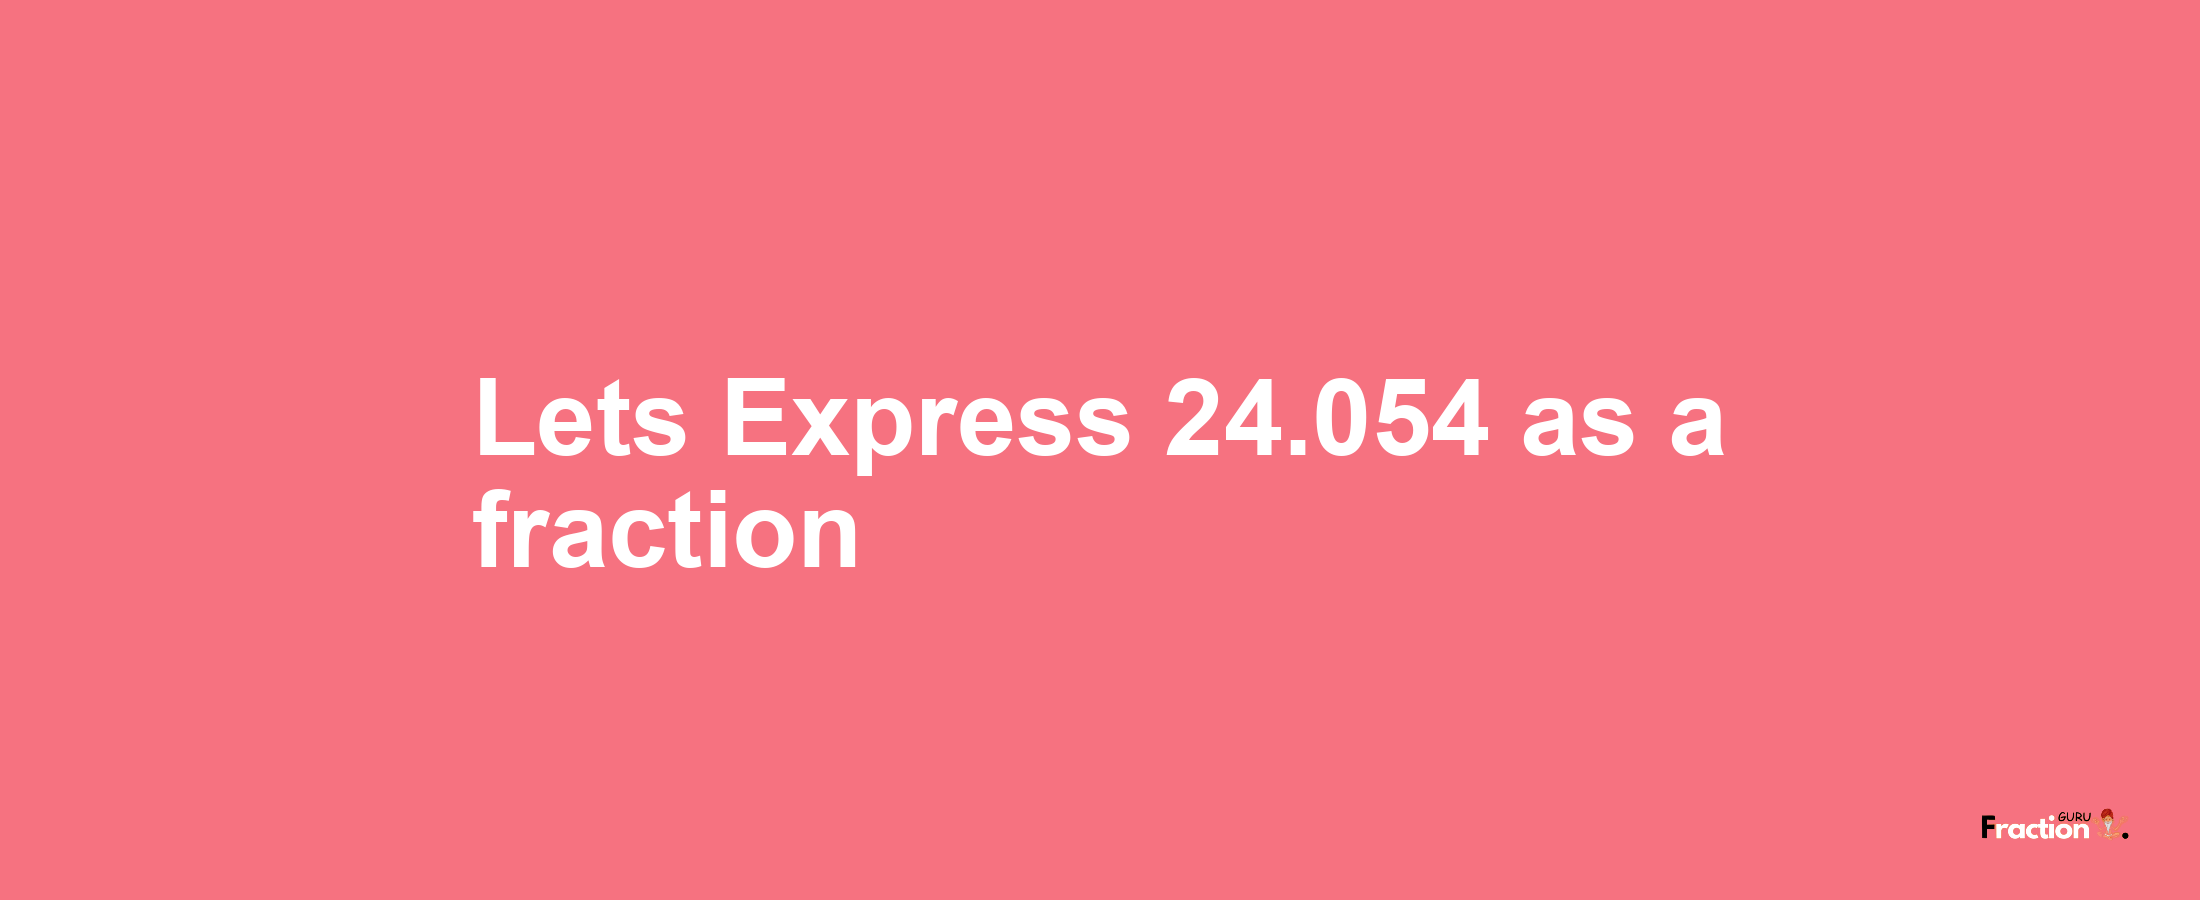 Lets Express 24.054 as afraction